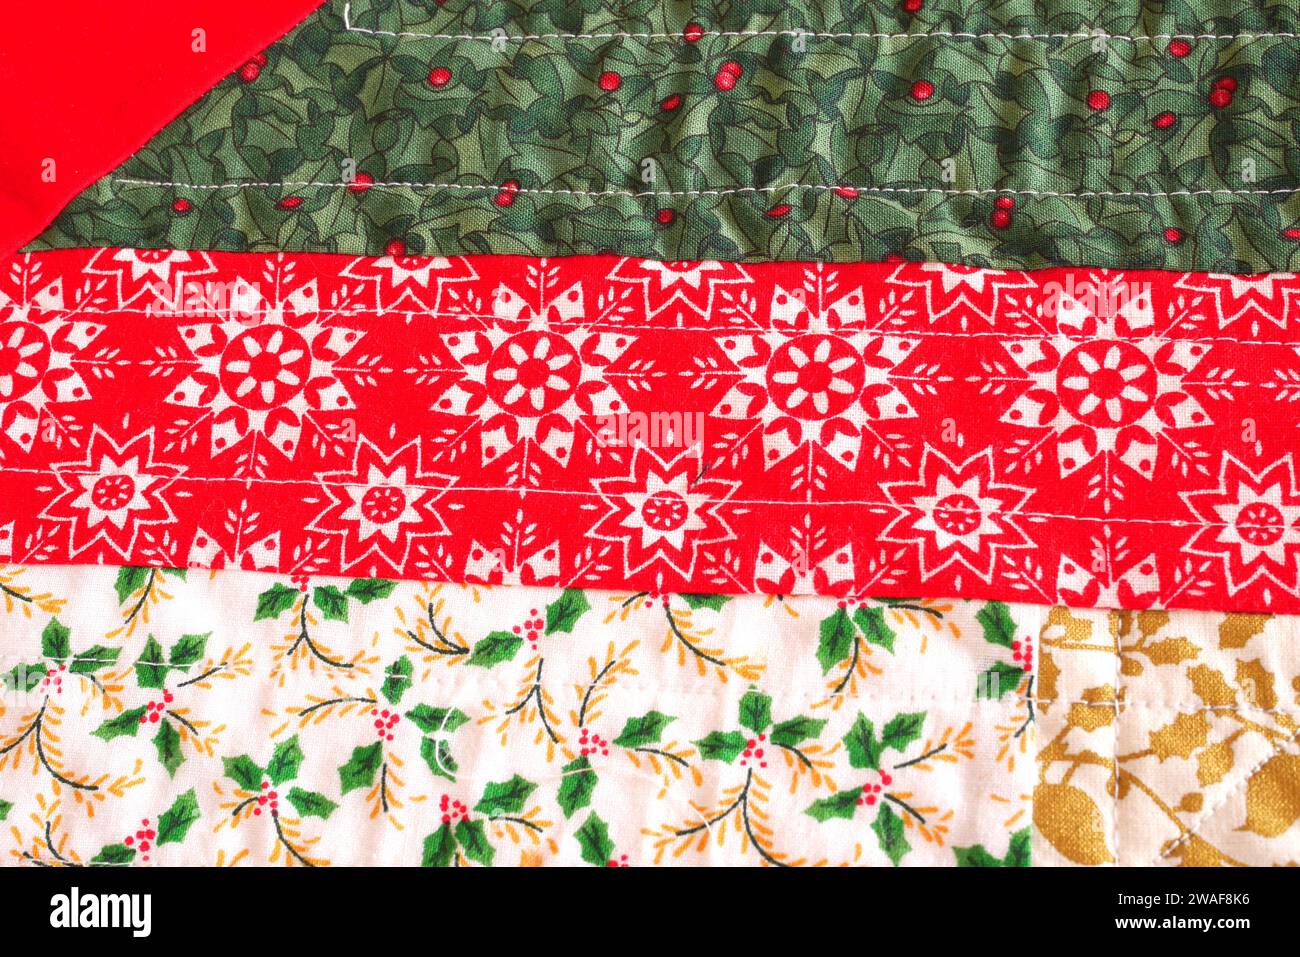 Detail of a hand-stitched Christmas table runner Stock Photo